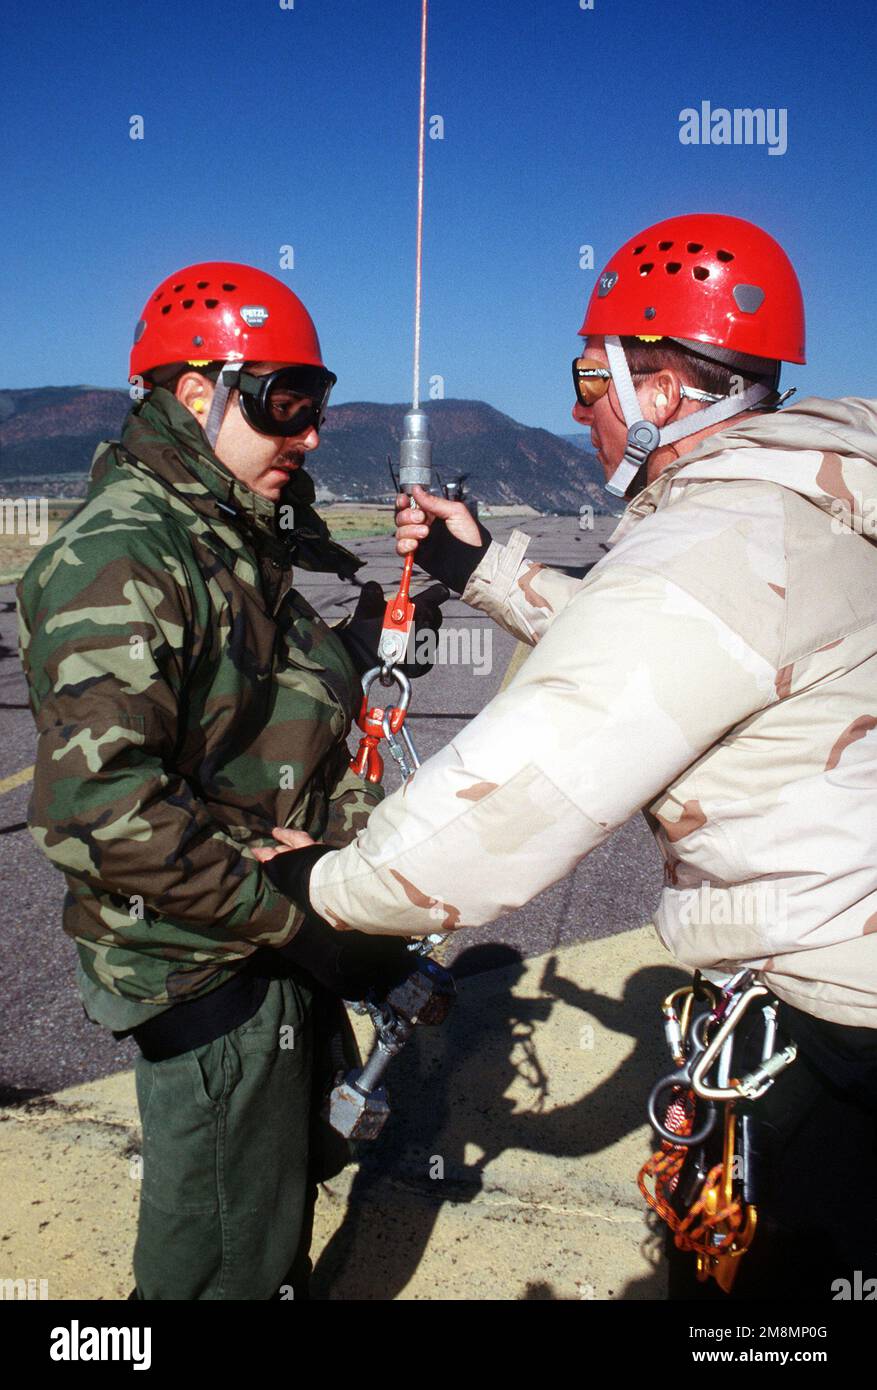 Explosive Ordnance Disposal SPECIALIST SRA Kelly Roy (left) receives some last minute instructions from pararescueman MSGT Rick Weaver (right) prior to being hoisted by a CH-47 helicopter. The training will enable A-10 recovery team members to search in areas inaccessible by foot. Base: Eagle State: Colorado (CO) Country: United States Of America (USA) Stock Photo